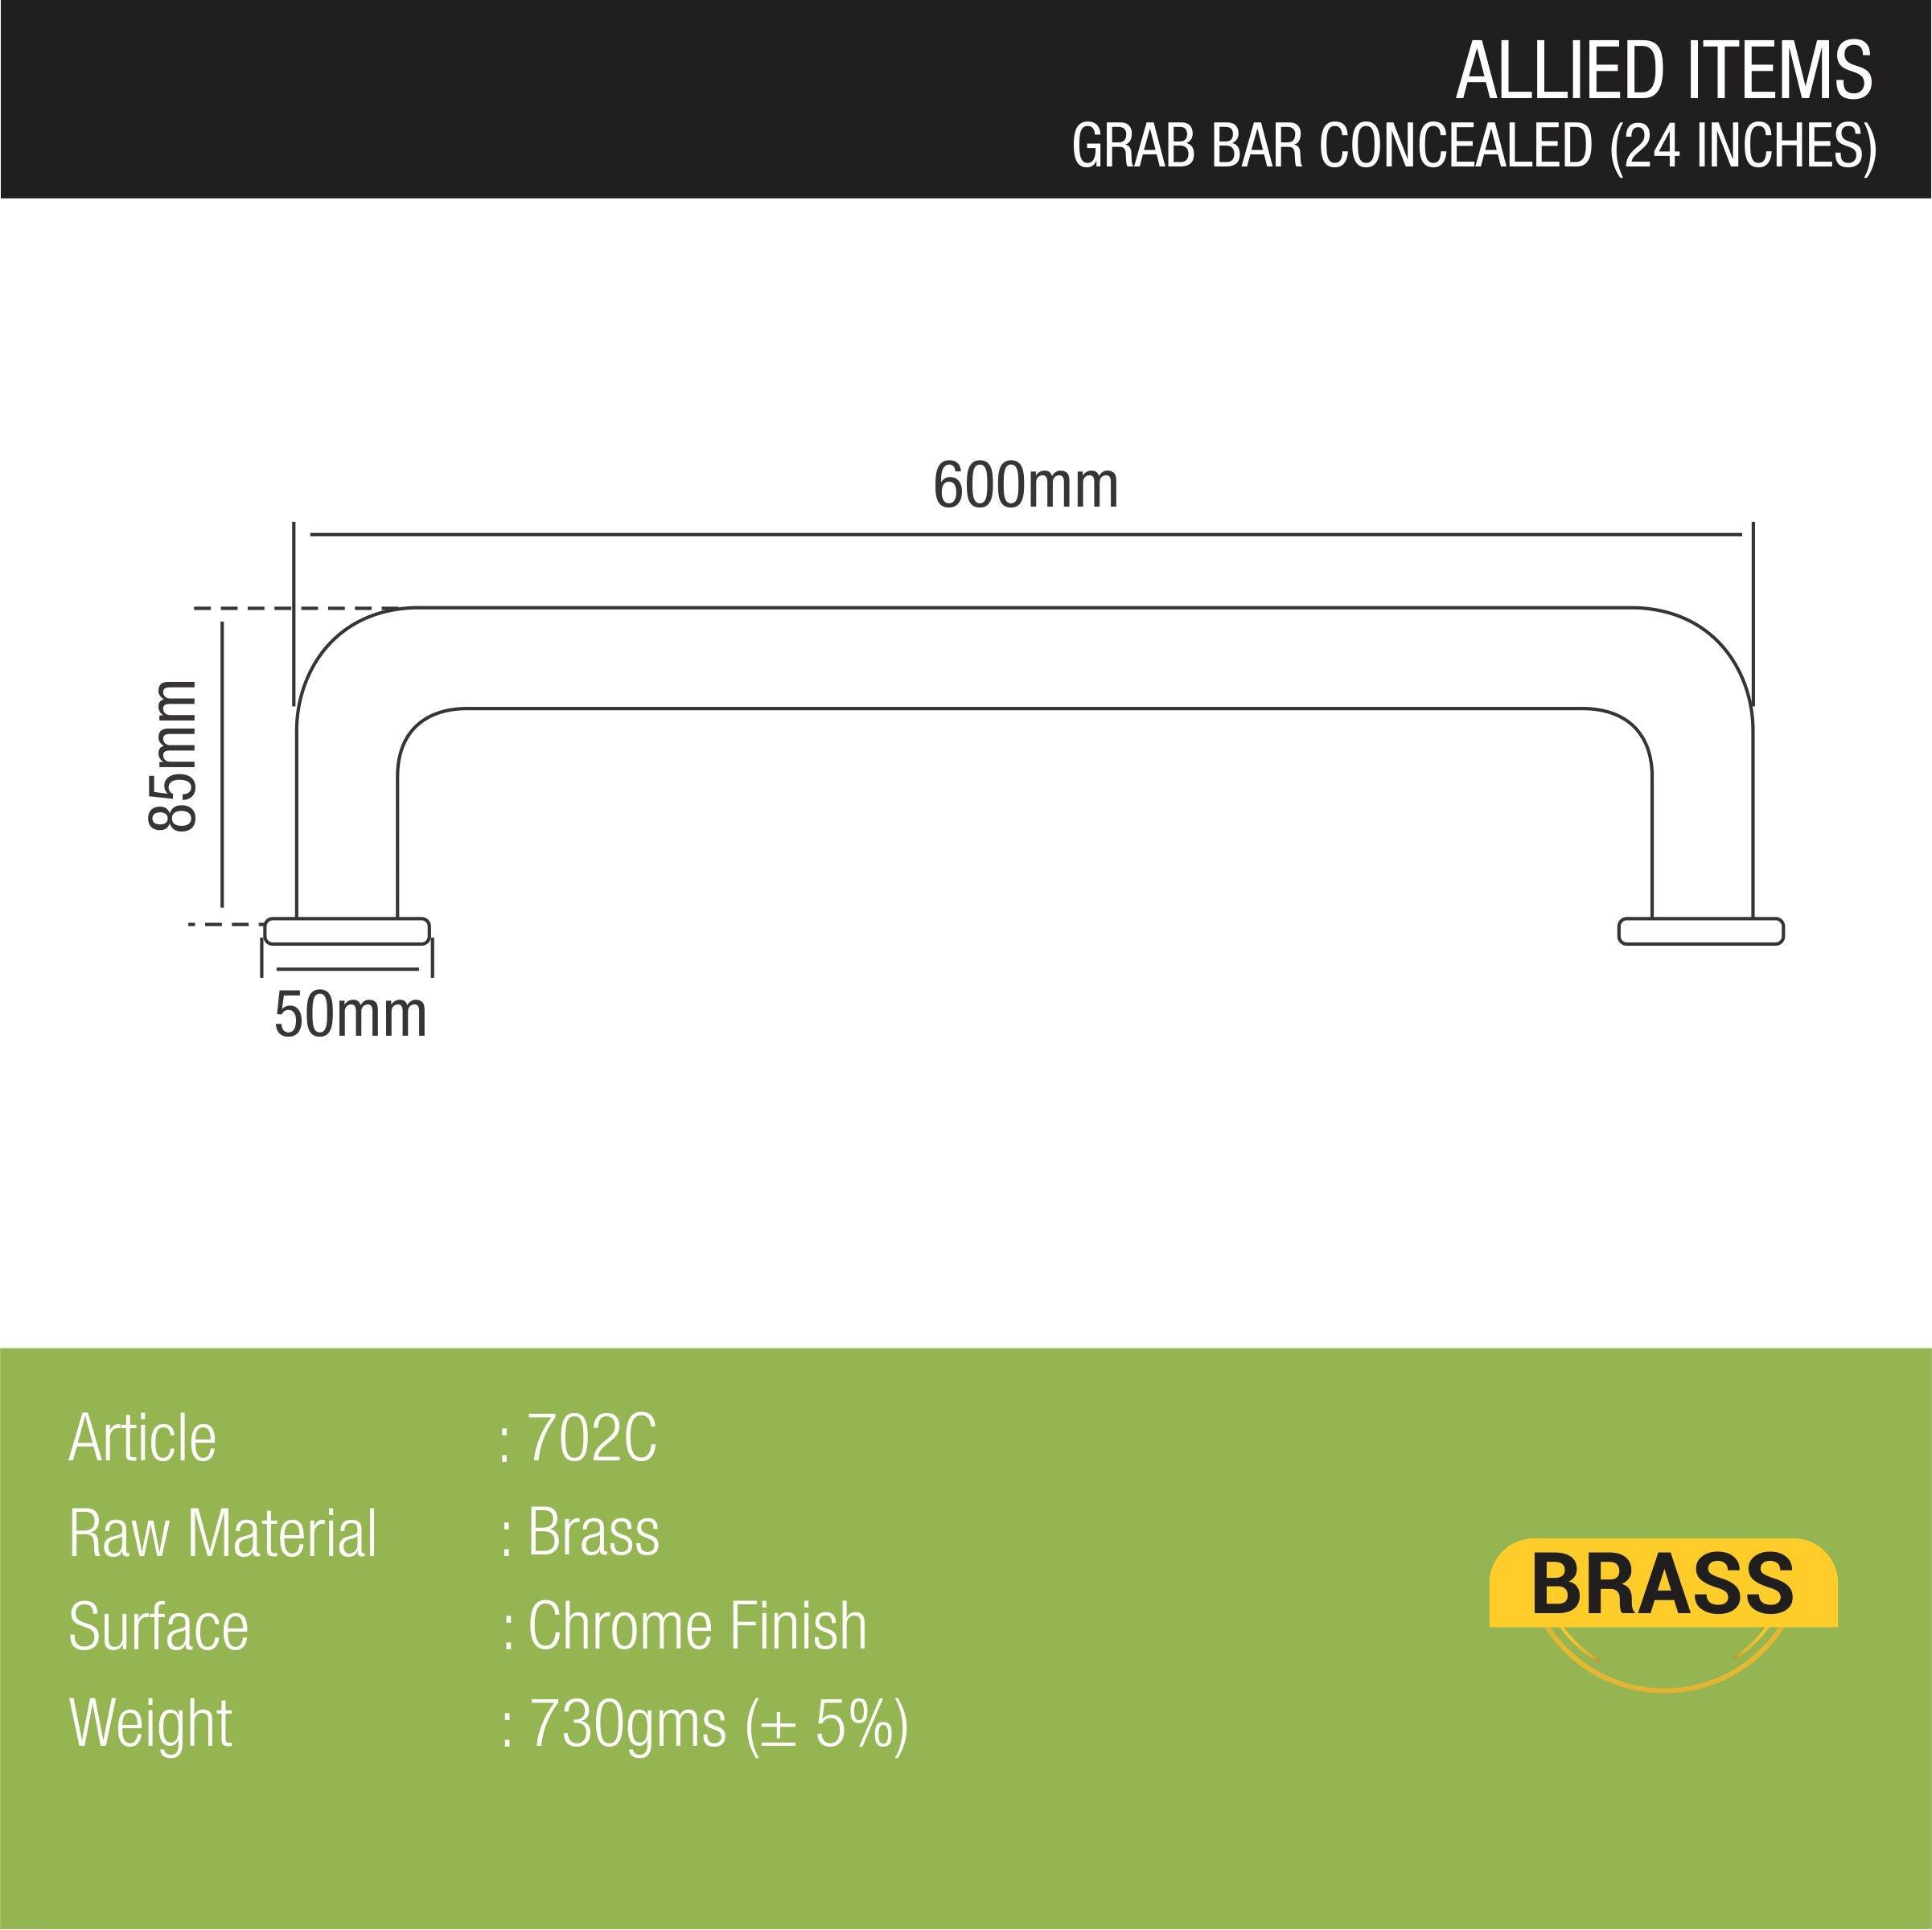 Brass Concealed Grab Bar (24 Inches) sizes and dimensions